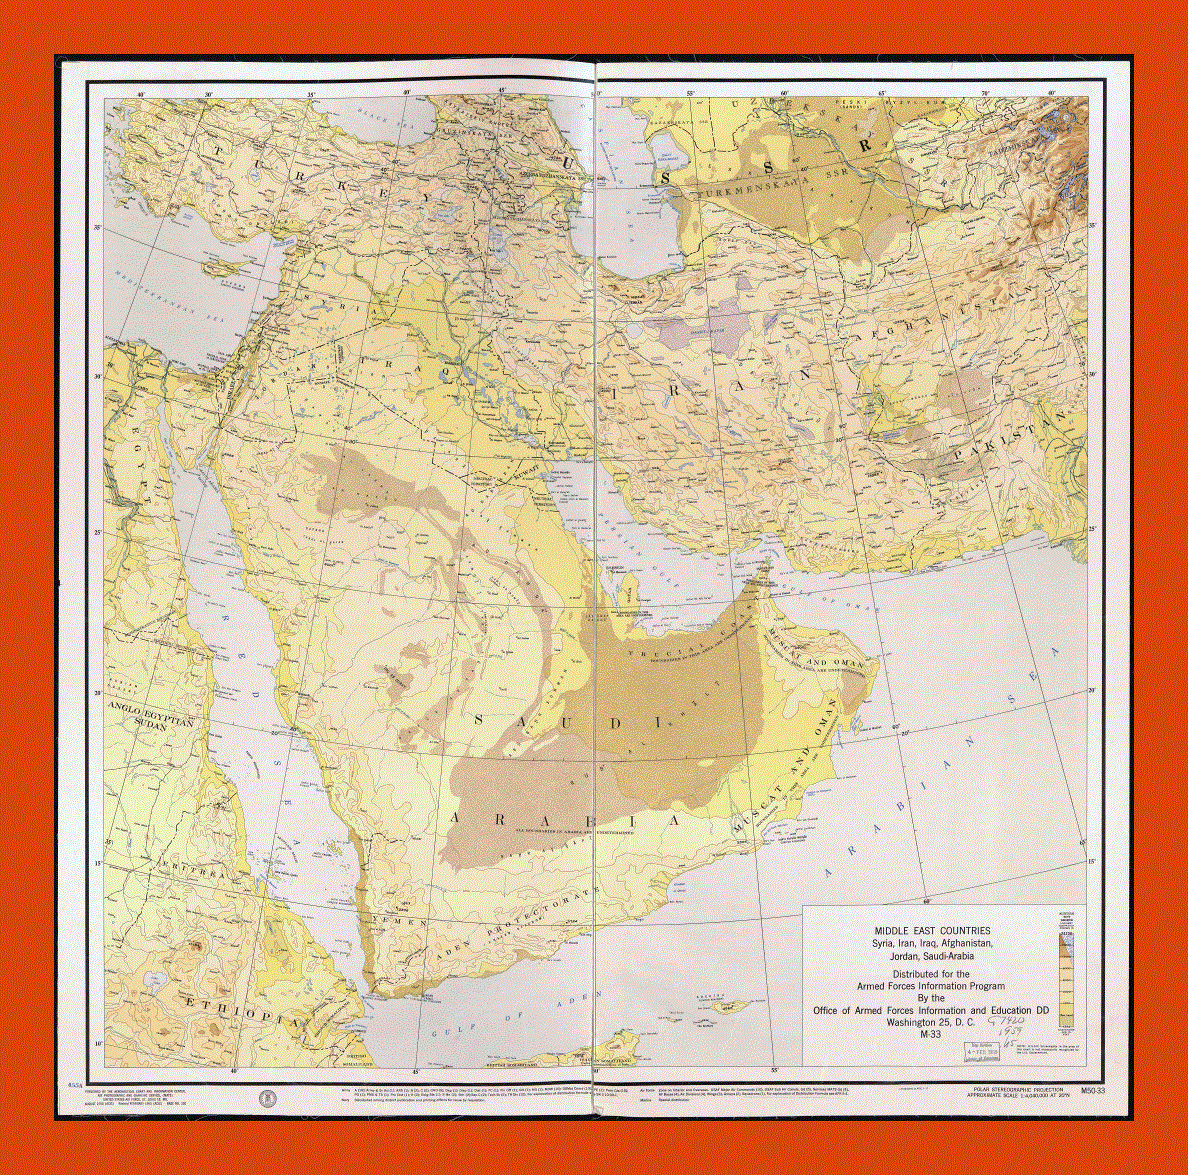 Old map of Middle East countries - Syria, Iran, Iraq, Afghanistan, Jordan and Saudi Arabia - 1955